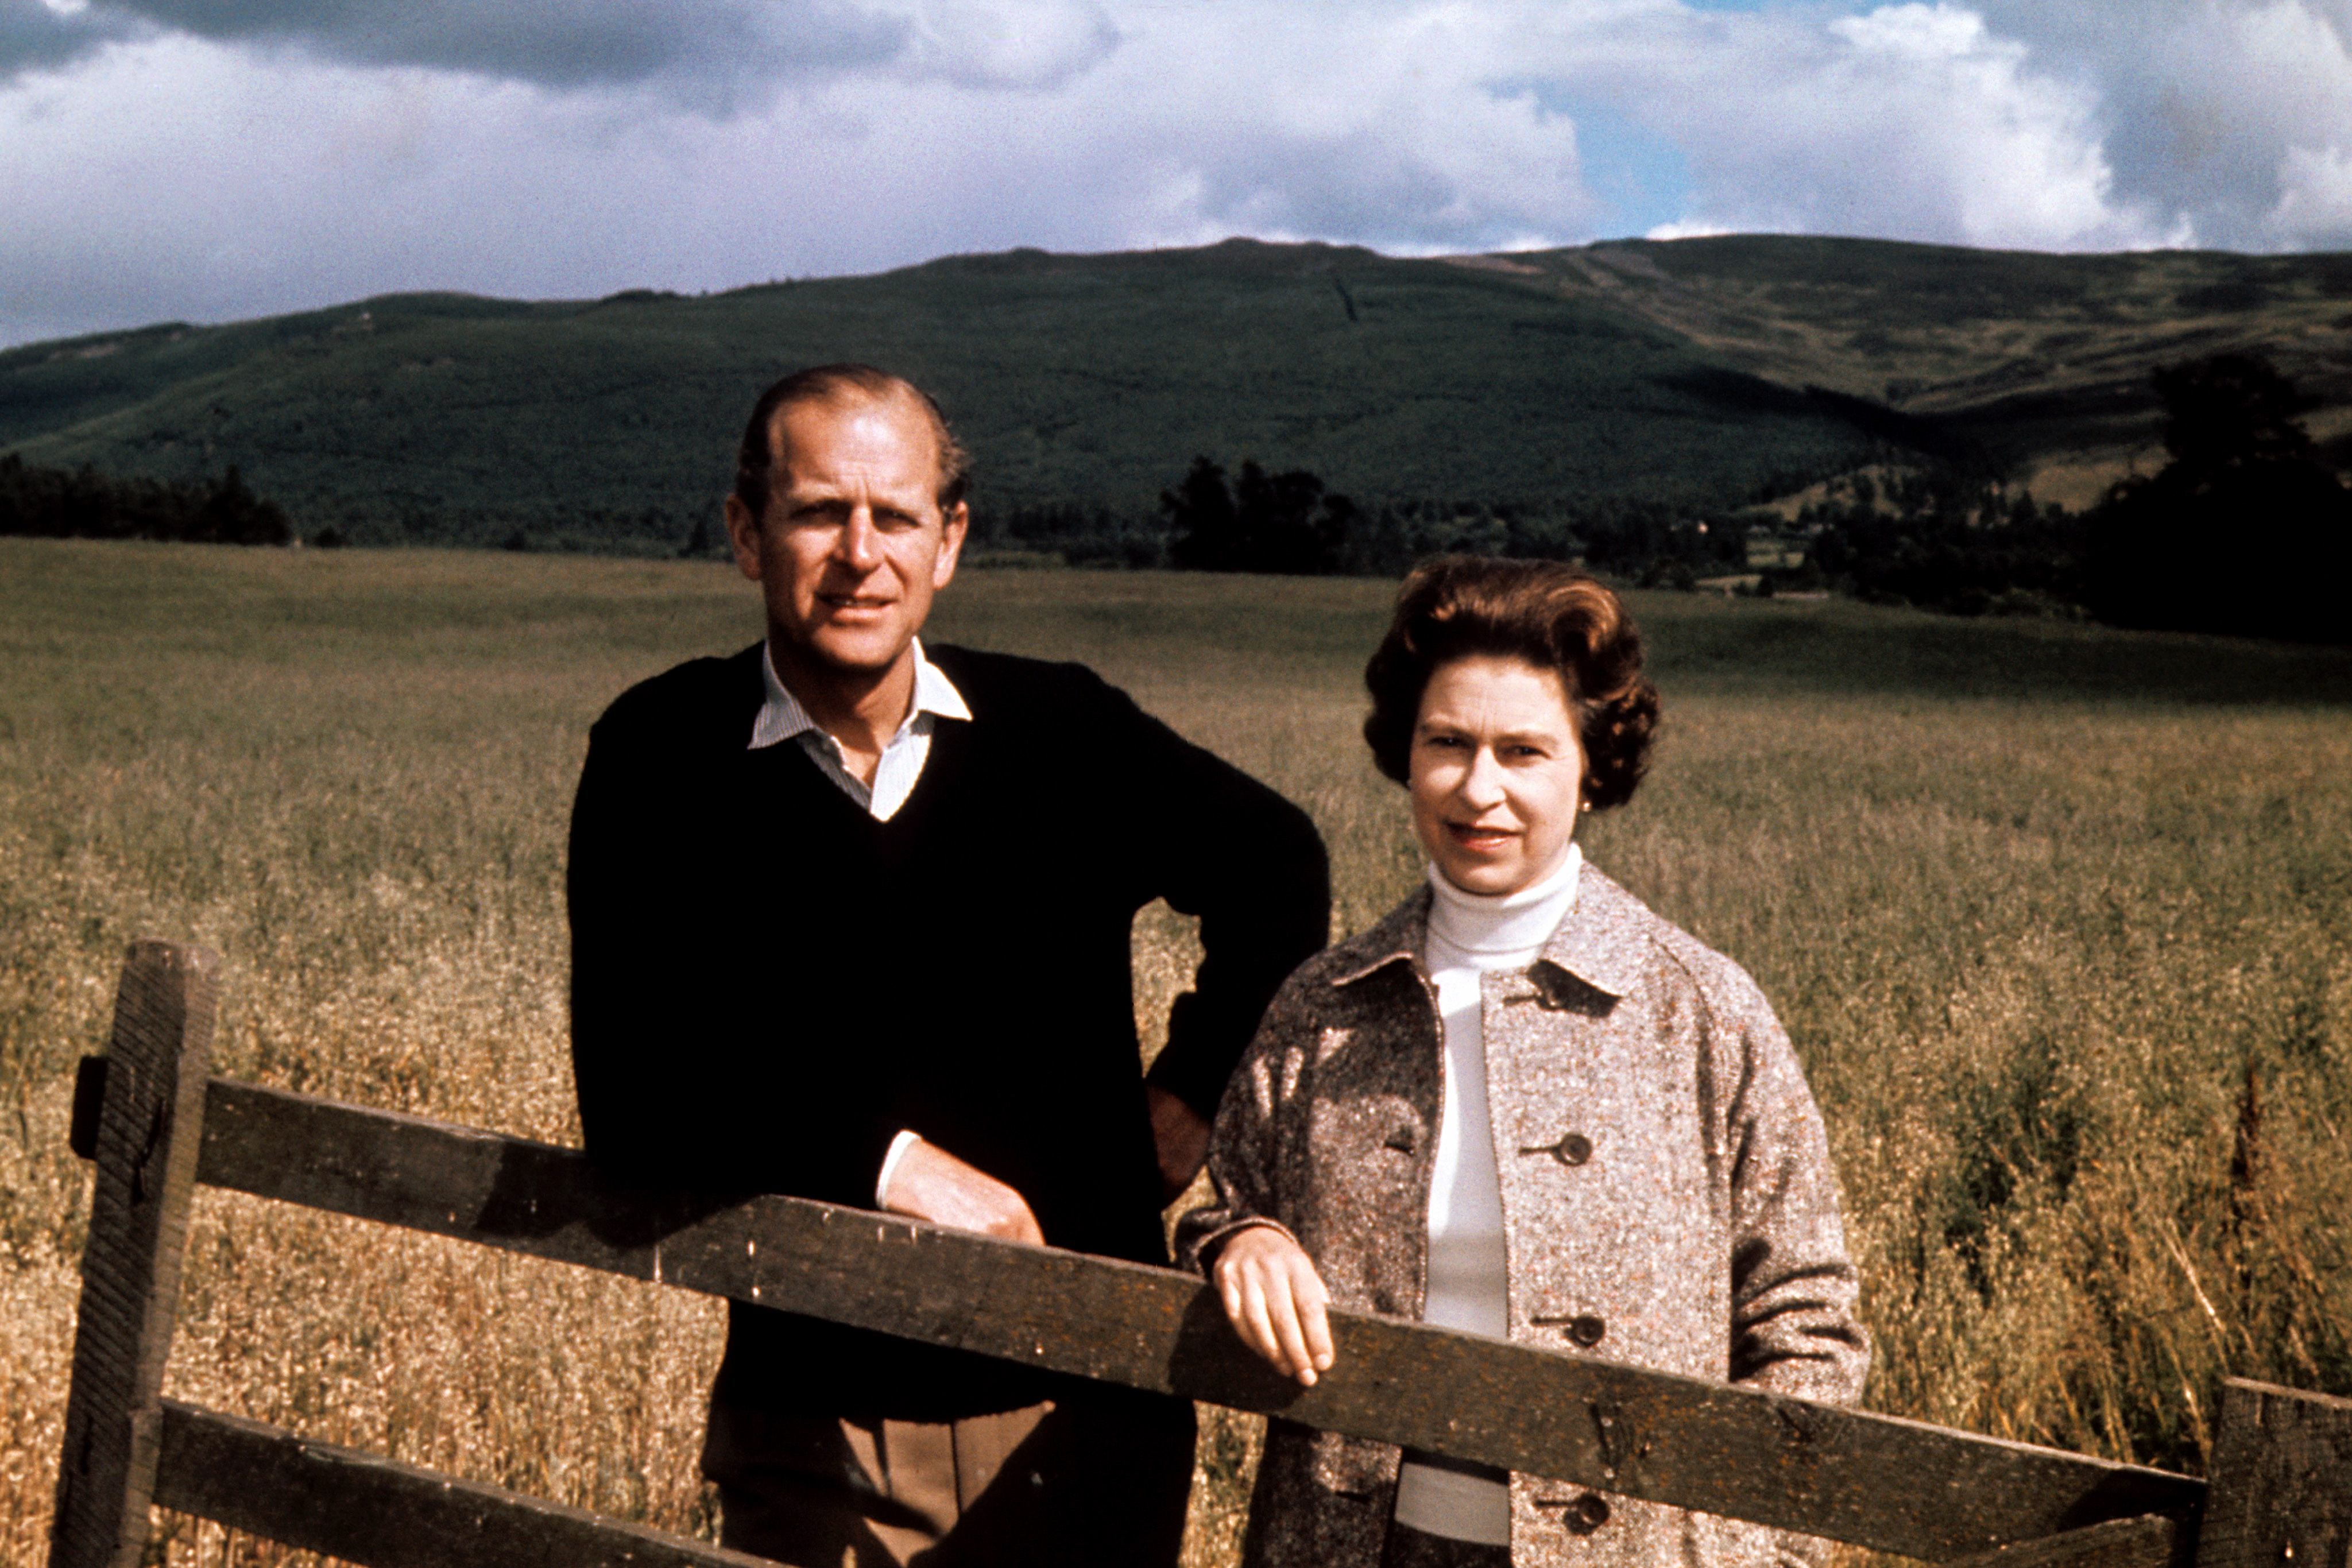 Queen Elizabeth II and the Duke of Edinburgh at Balmoral to celebrate their Silver Wedding anniversary.